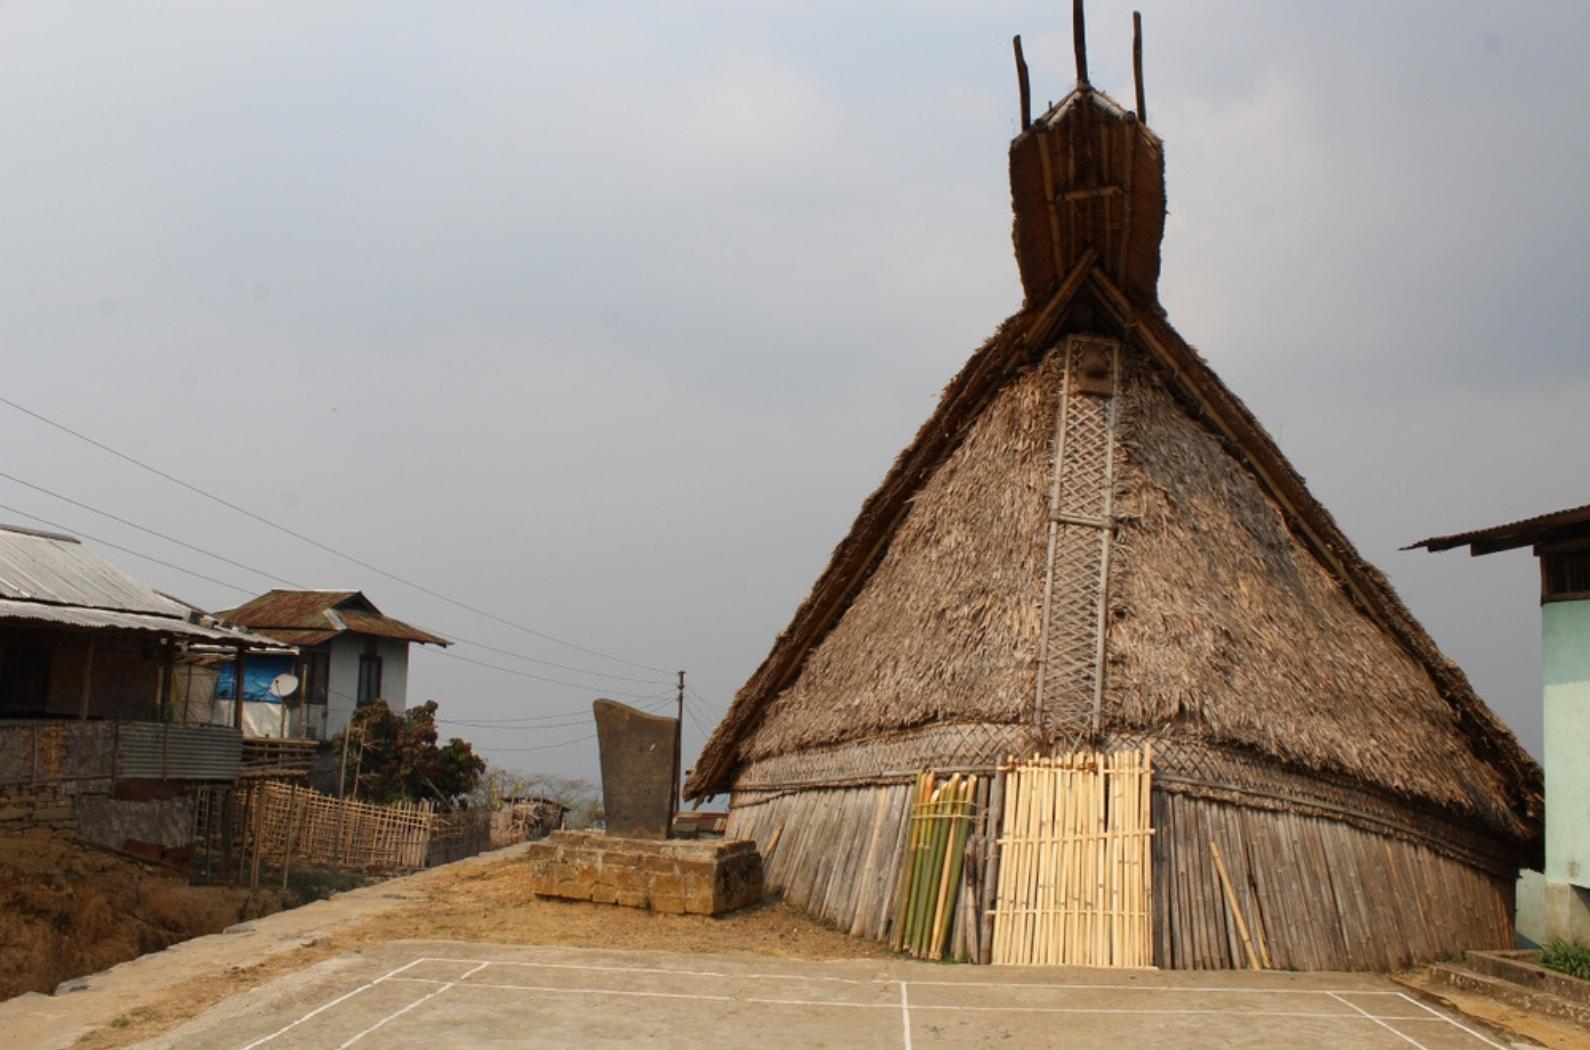 The external view of a Morung (dormitory for young people) at Ungma Village, Nagaland.